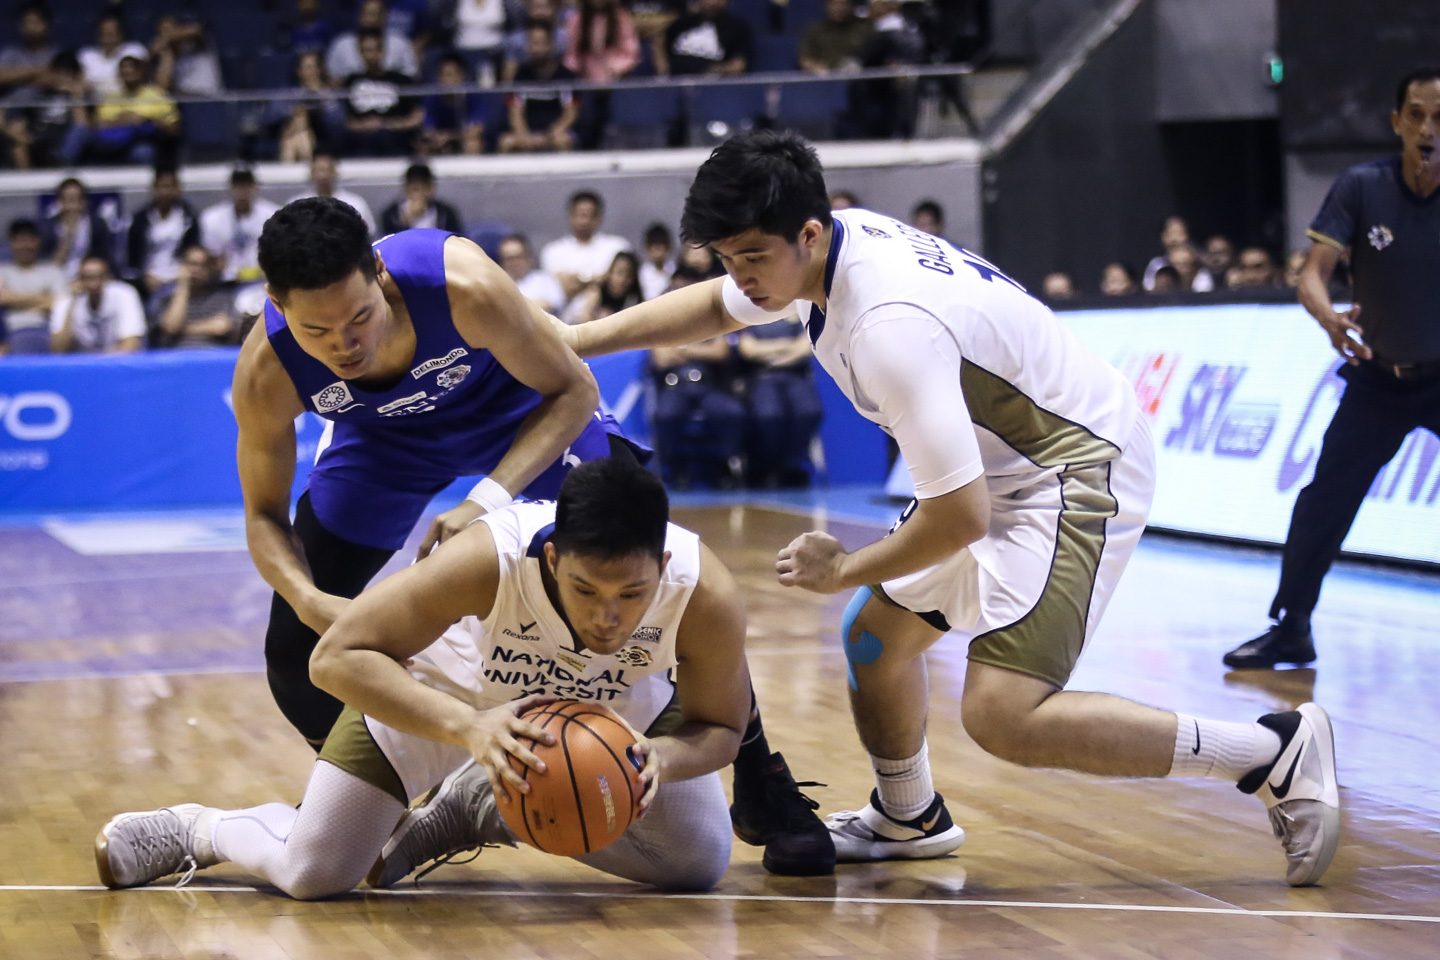 Elite Ateneo defense holds NU to 46 points in blowout win